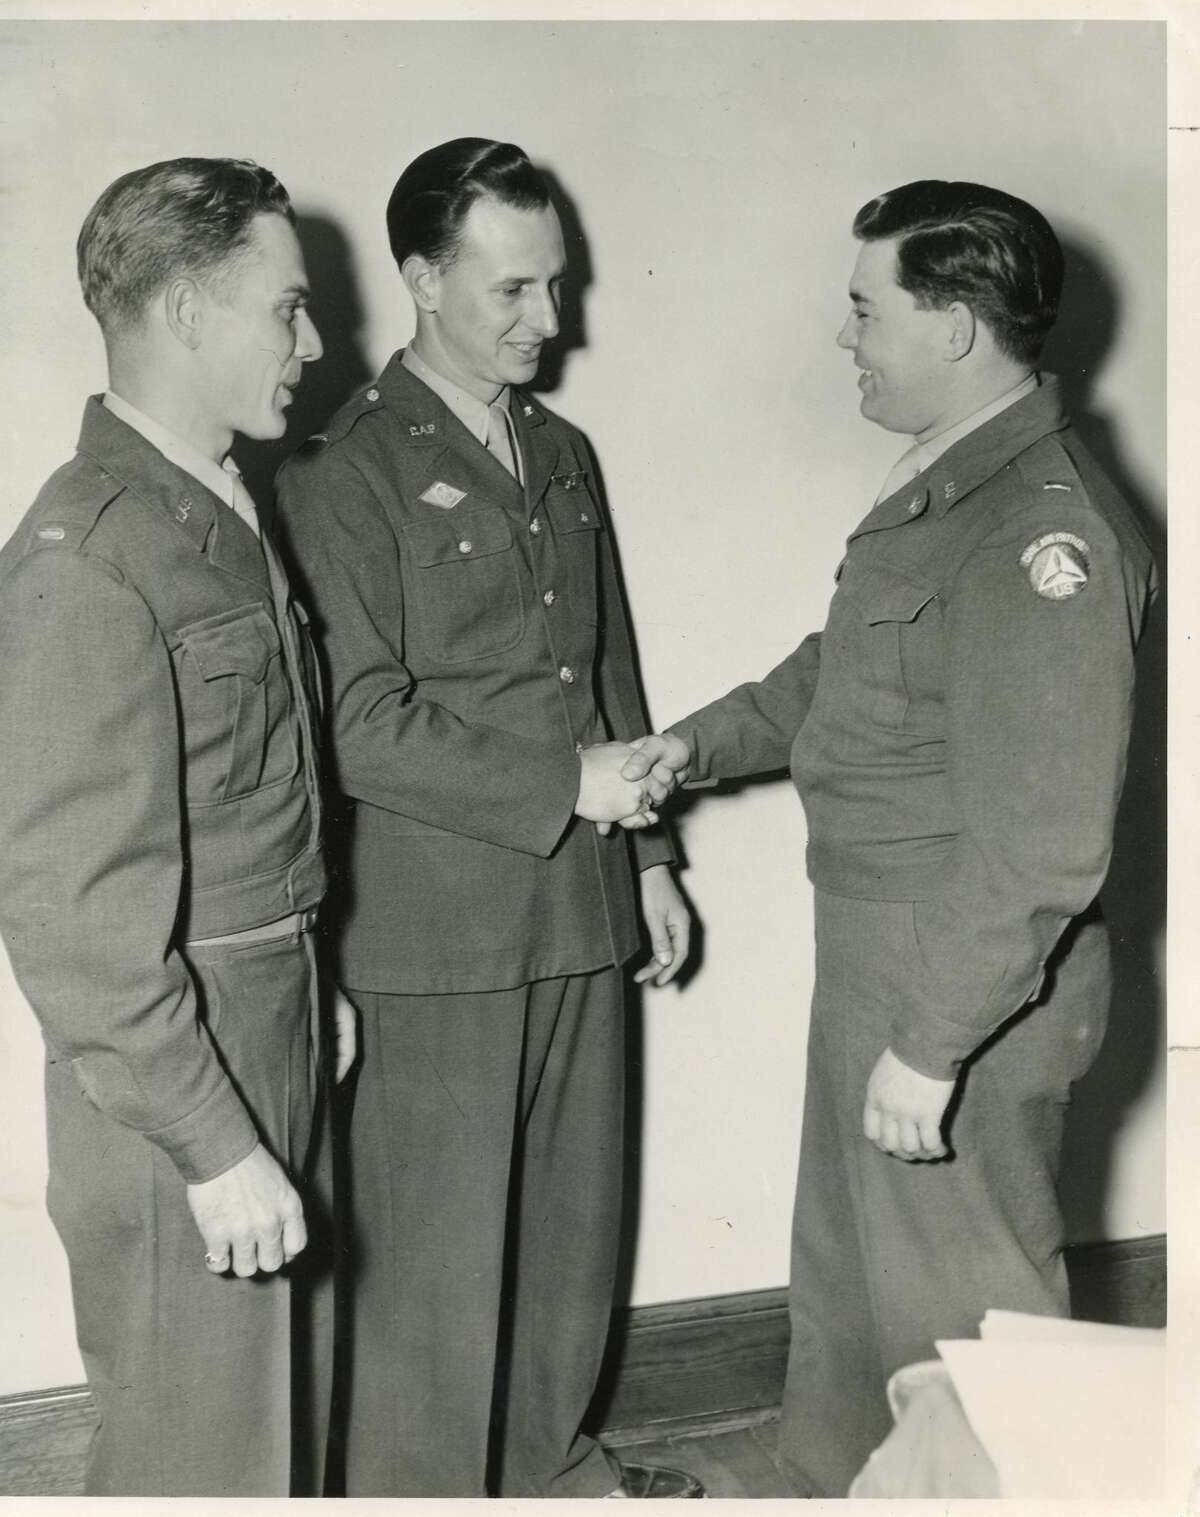 Promotions come in Civil Air Patrol. Getting their Warrant Officer promotions are, from left, Harold Loose and Arnold Green. Lt. Fred Varner offers his congratulations. July 1950